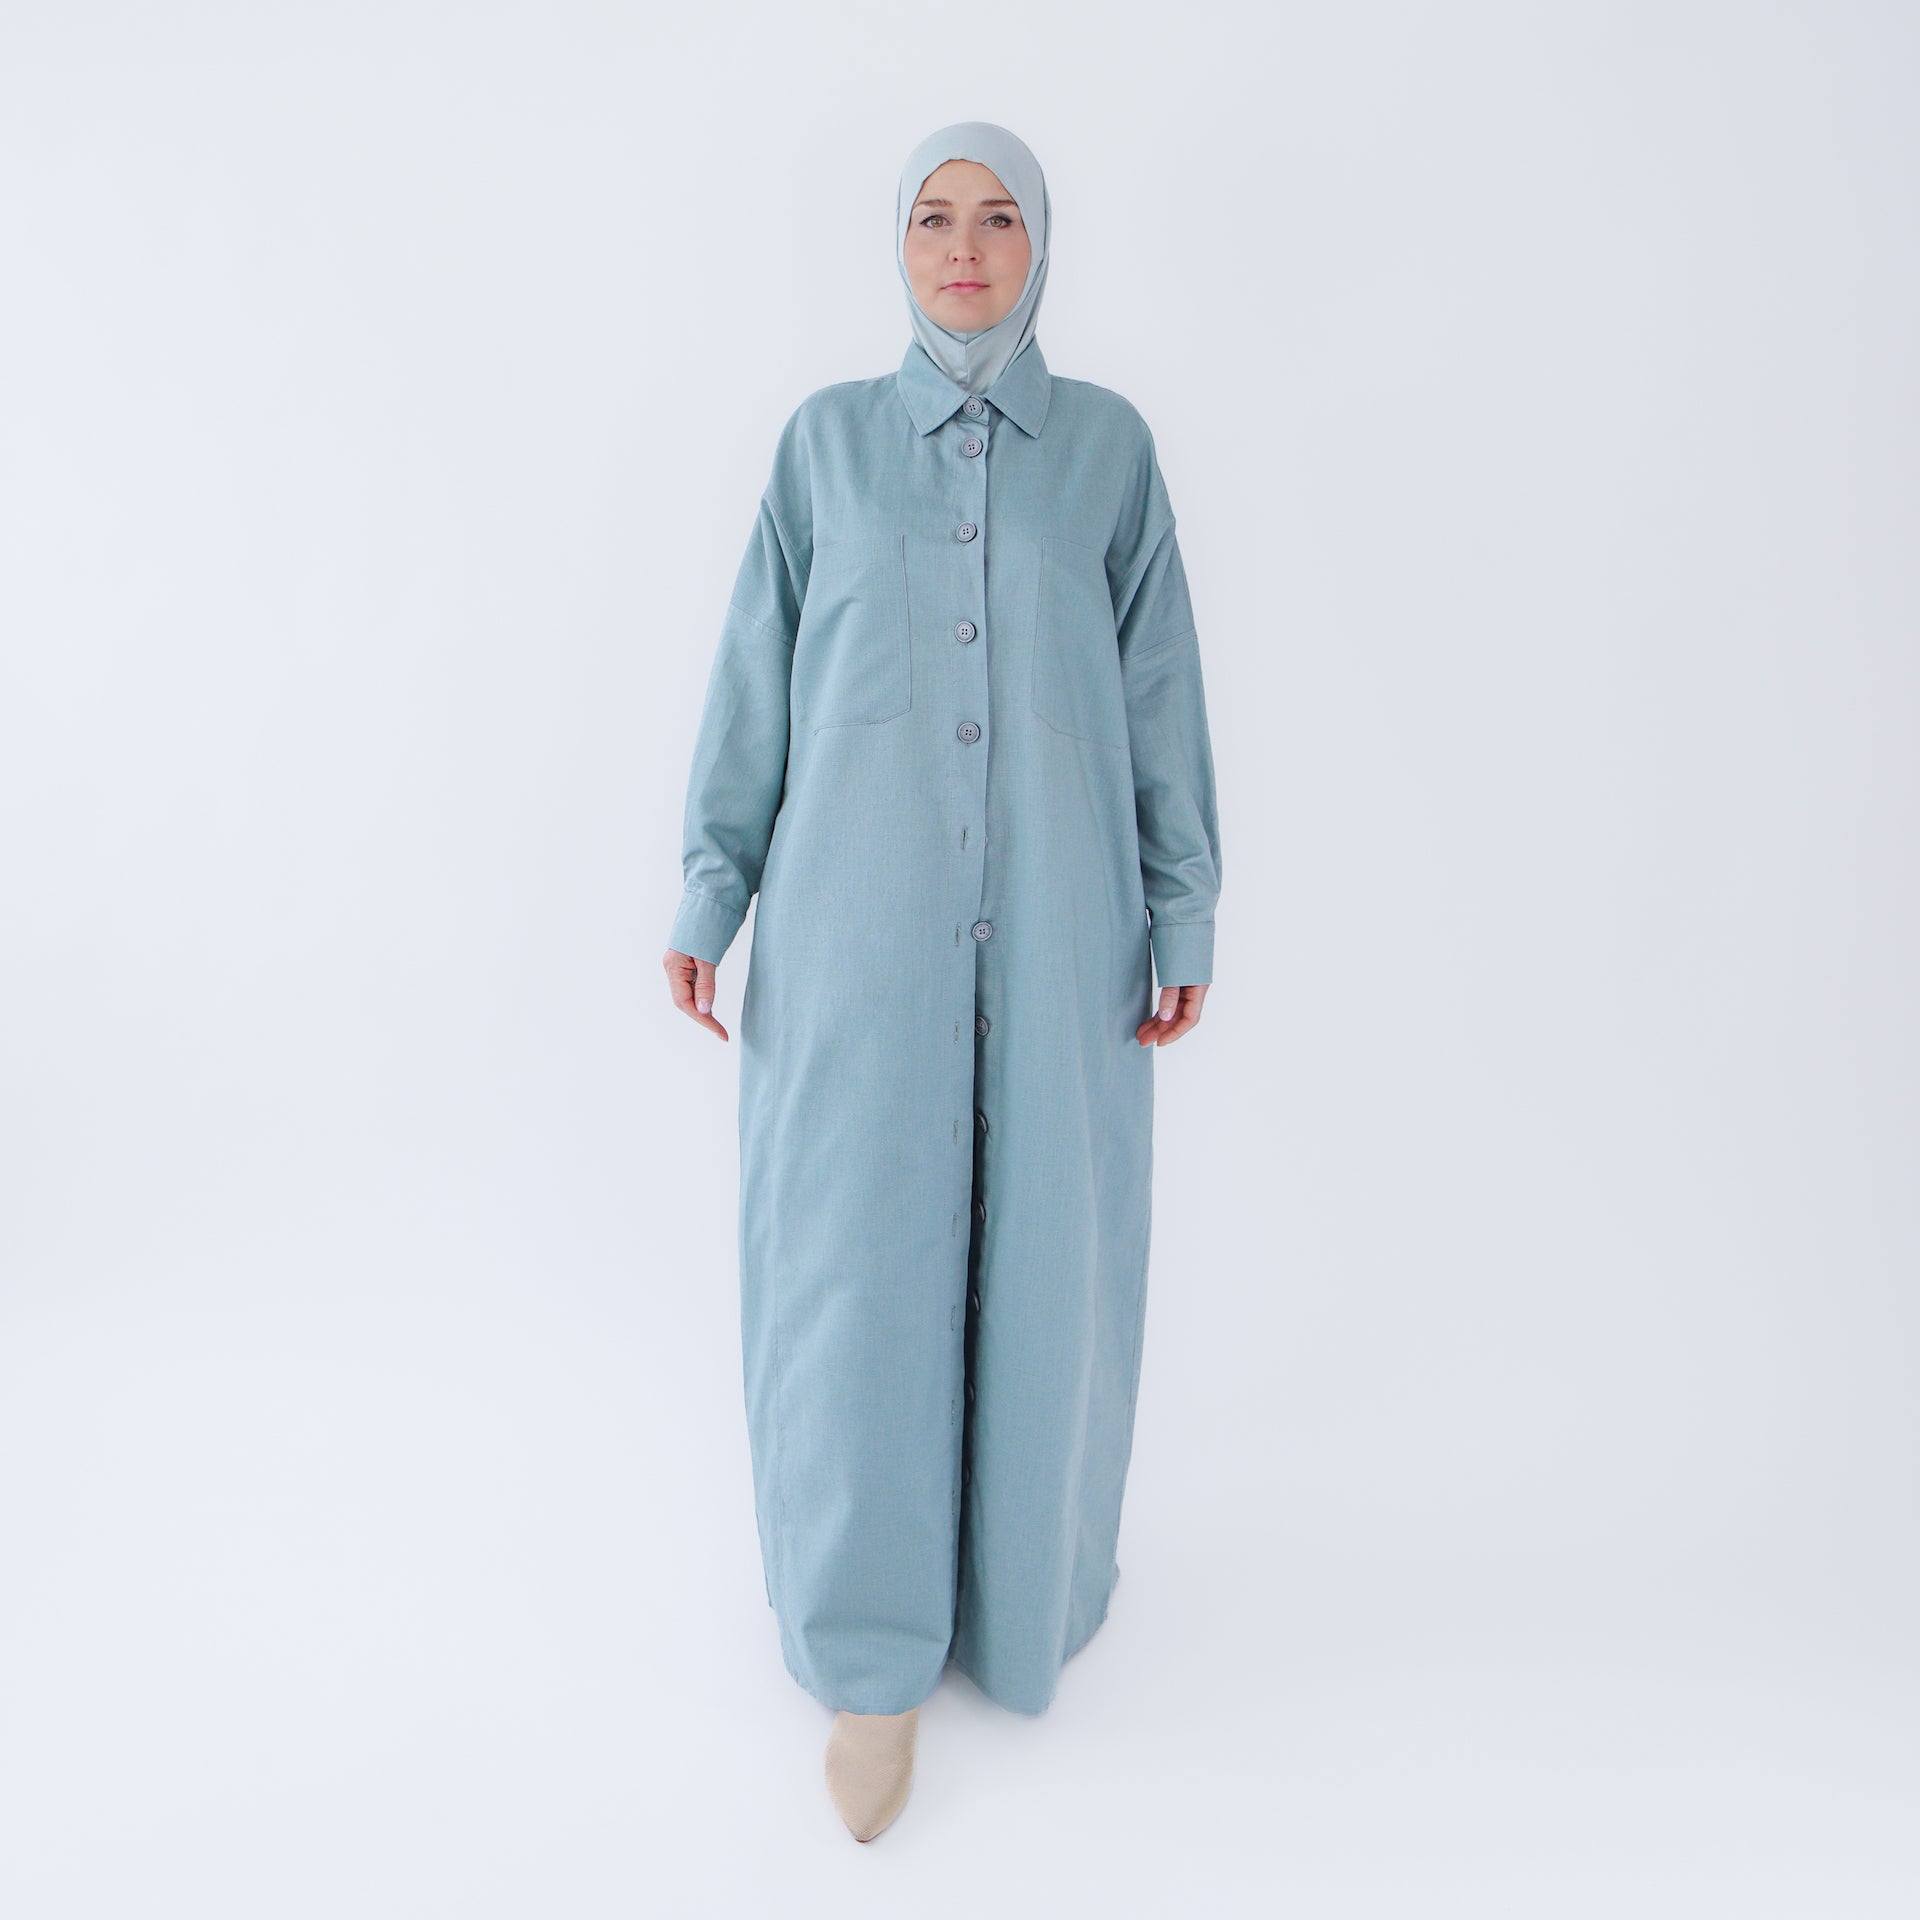 Abaya dress style maxi dress for women with wide trousers "Blue Linen" 2